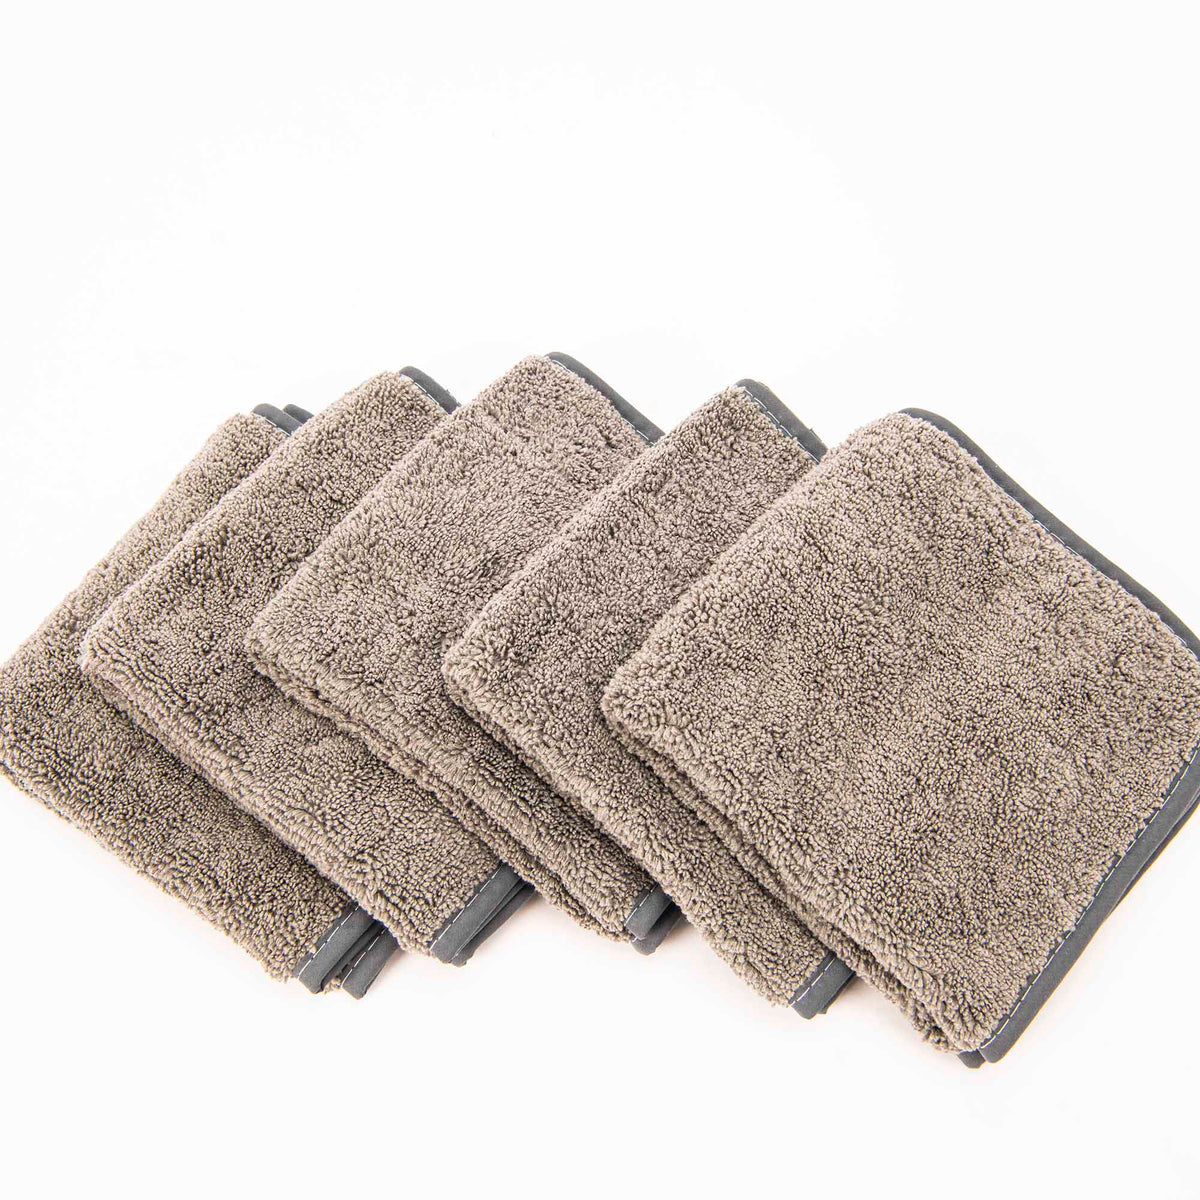 microfiber towels for detailing | car detailing kit under $25 | how to keep the interior of your car clean | MYCHANIC